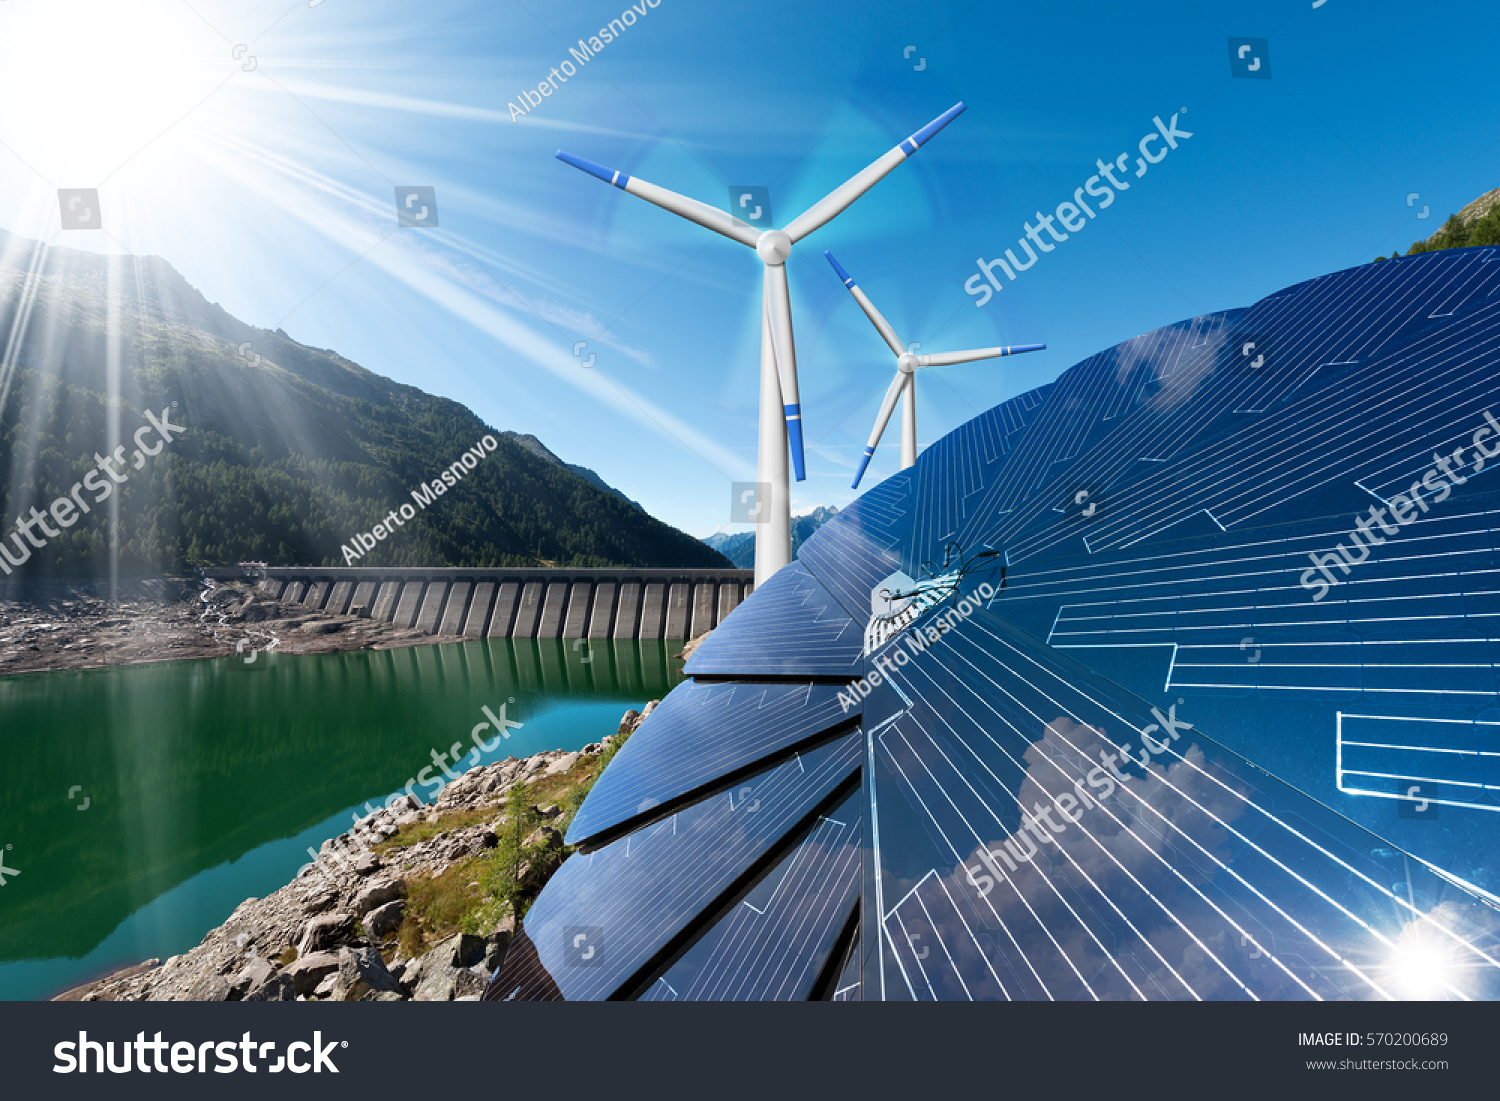 Renewable Energy - Sunlight with solar panel. Wind with wind turbines. Rain with dam for hydropower #570200689